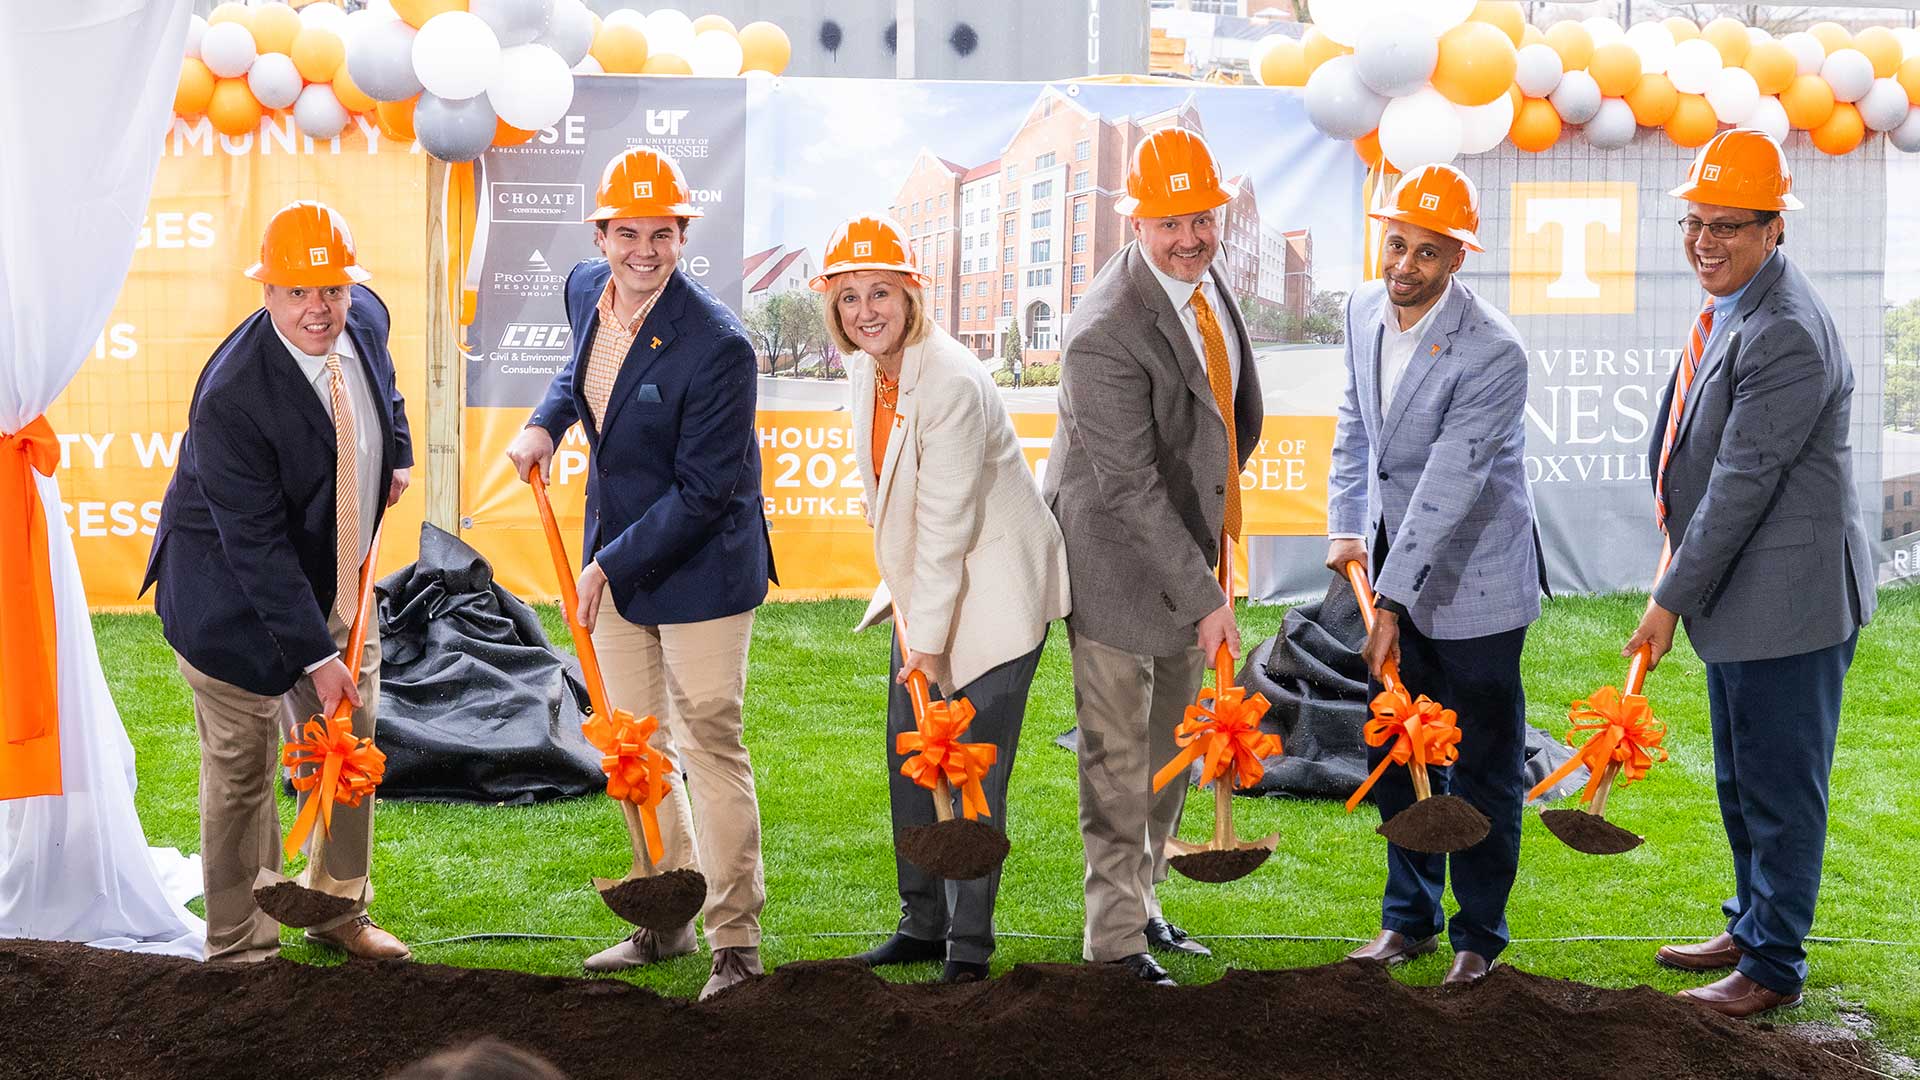 The university community celebrated the groundbreaking of two new residential communities slated to welcome students in the fall of 2025.